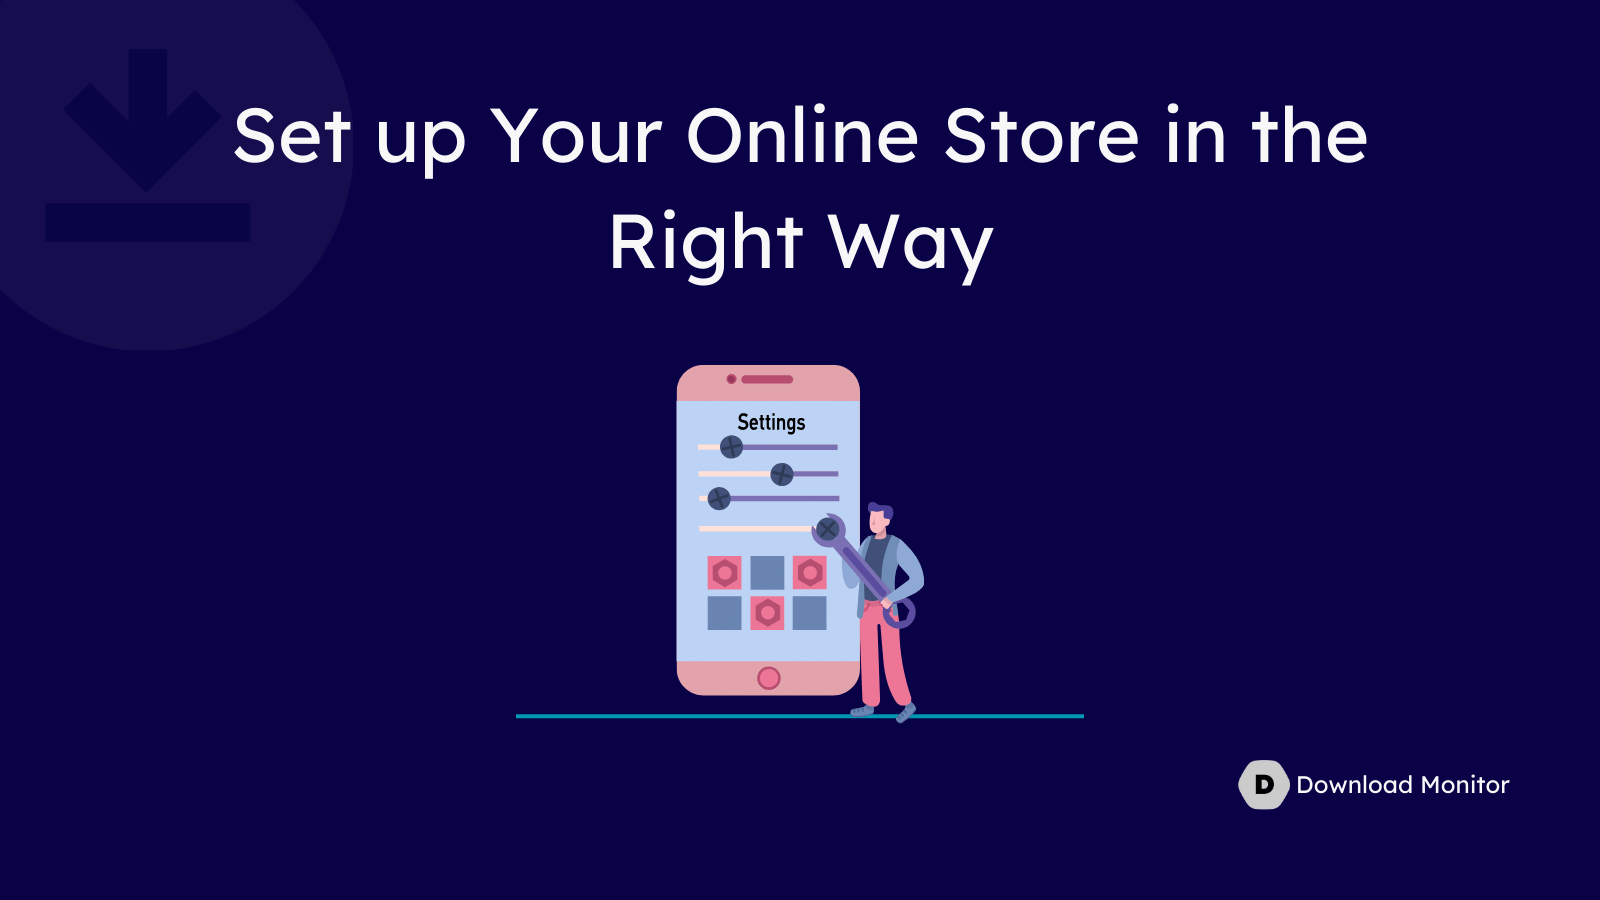 Set up Your Online Store in the Right Way